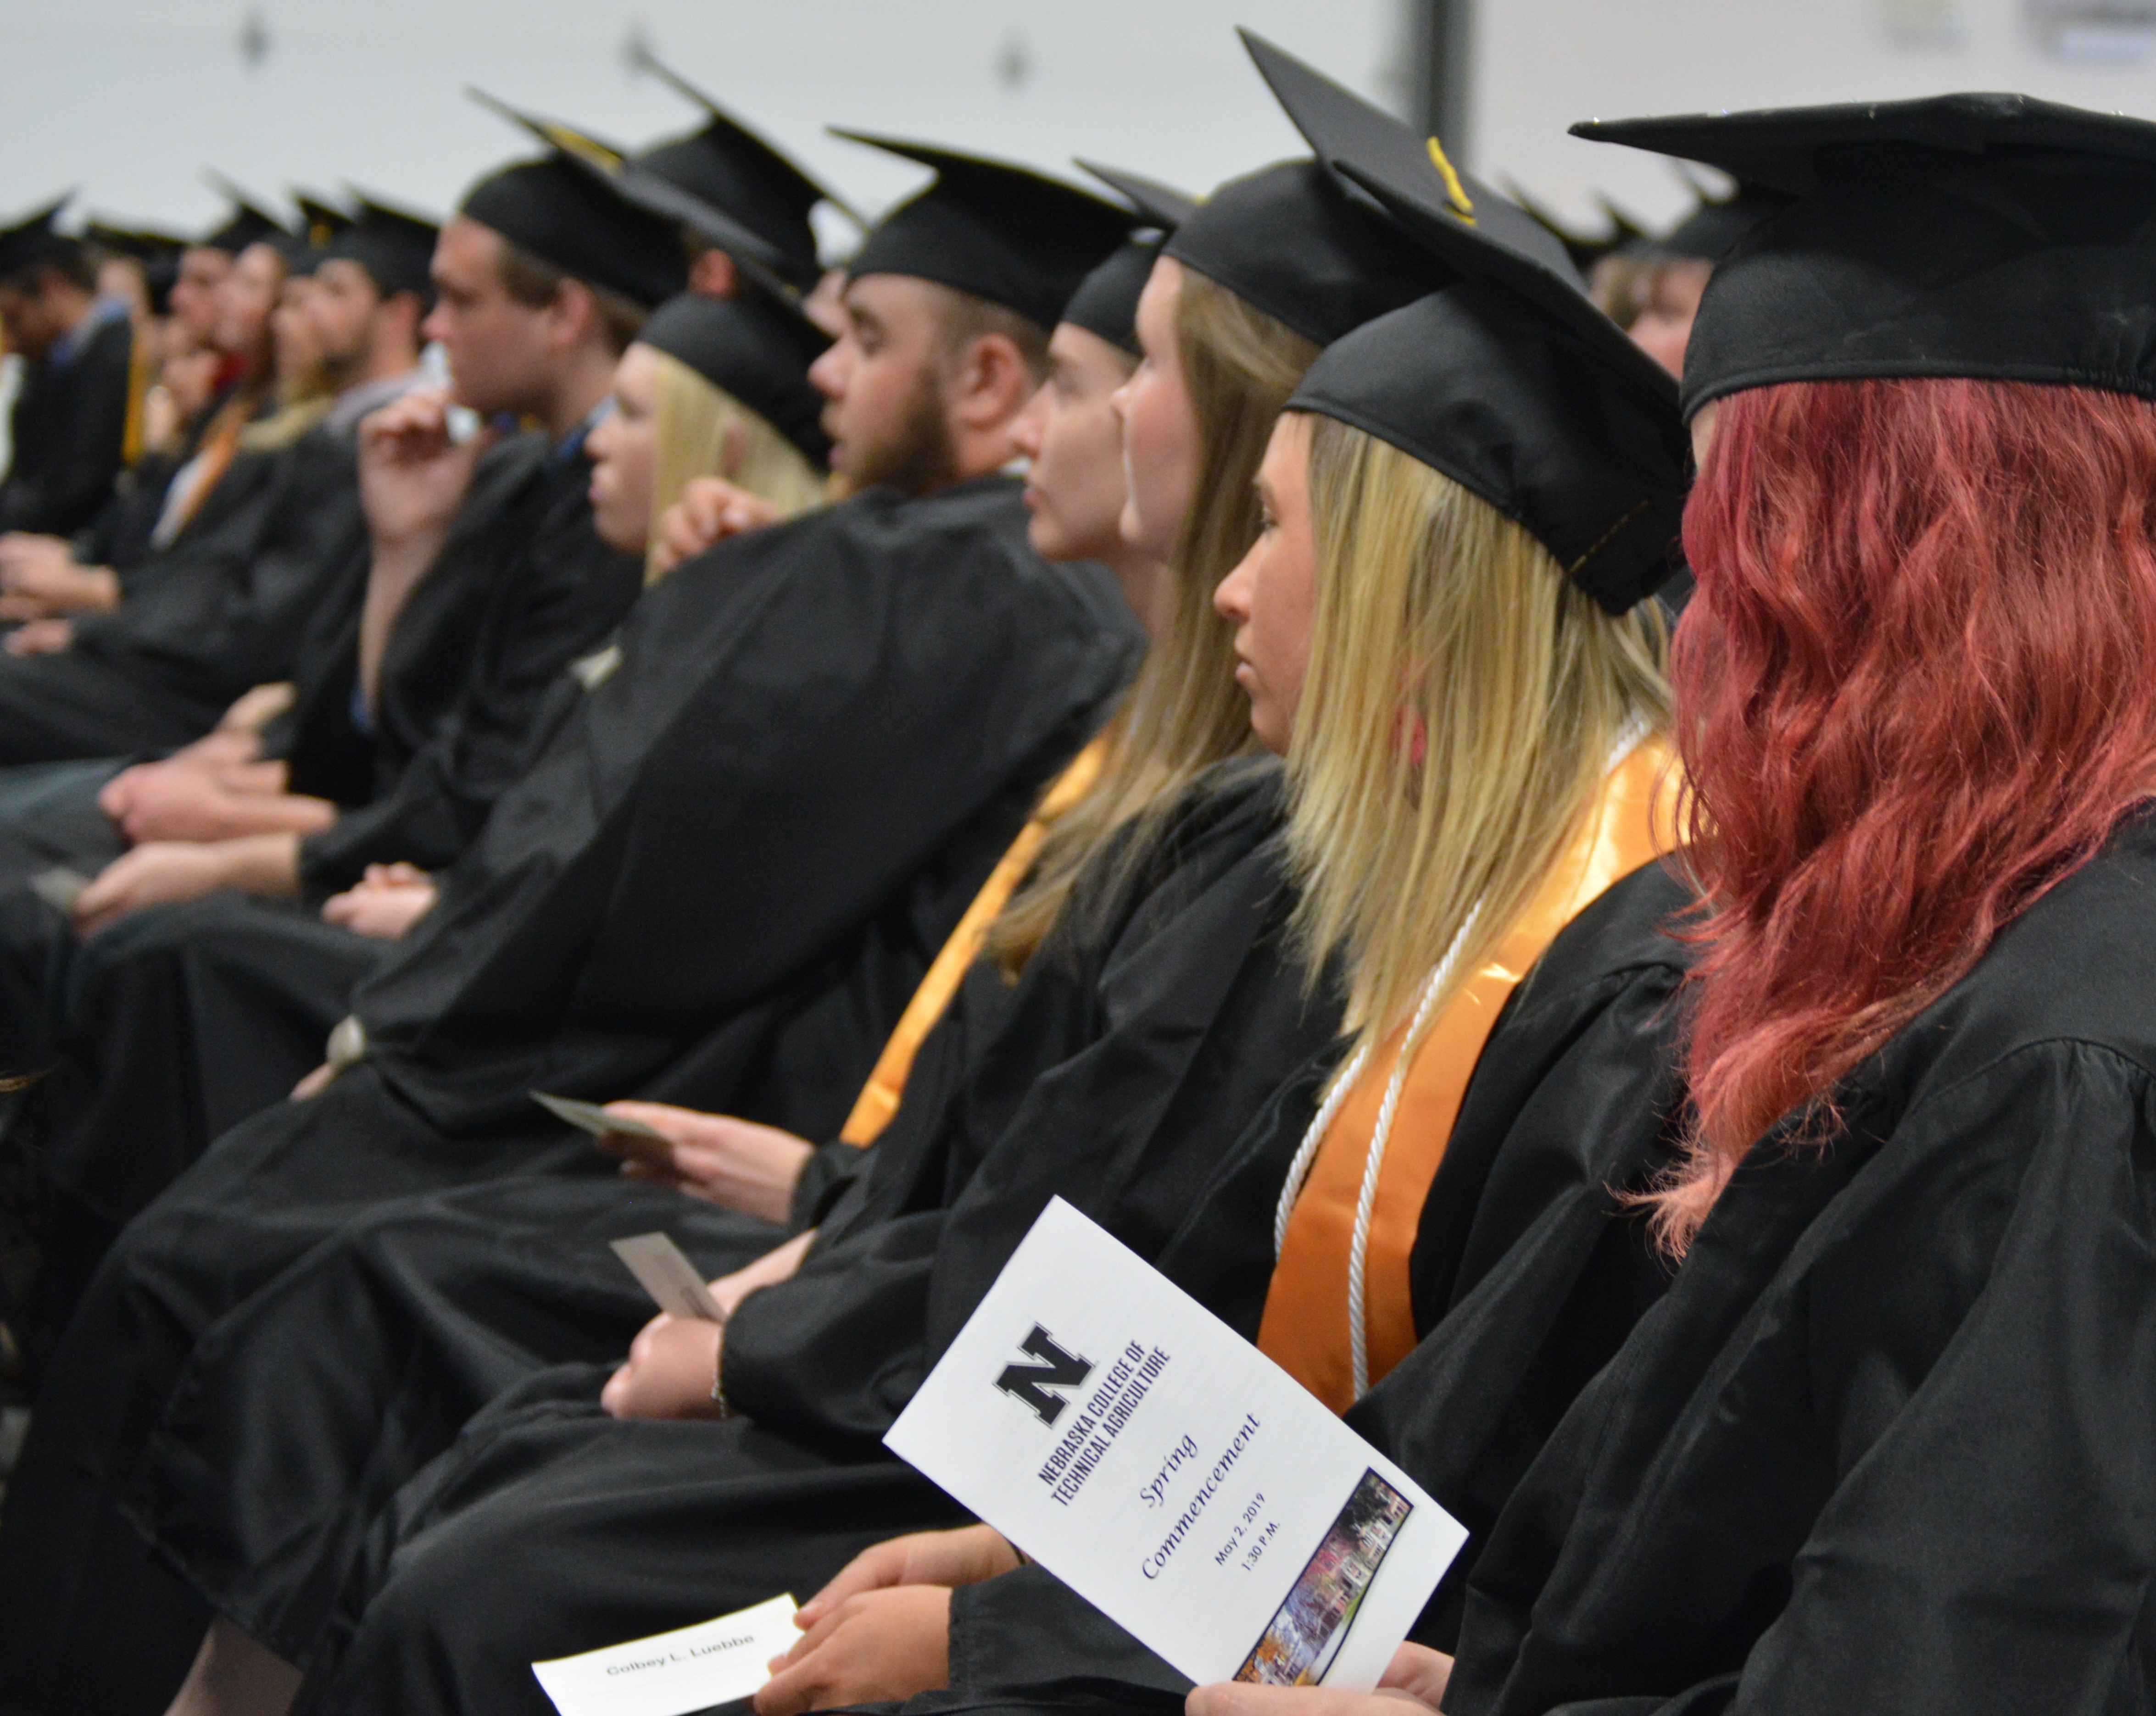 At NCTA Commencement on May 2, Aggie graduates listen to Joan Ruskamp advising they pursue their passion and be problem solvers. (NCTA News photo)